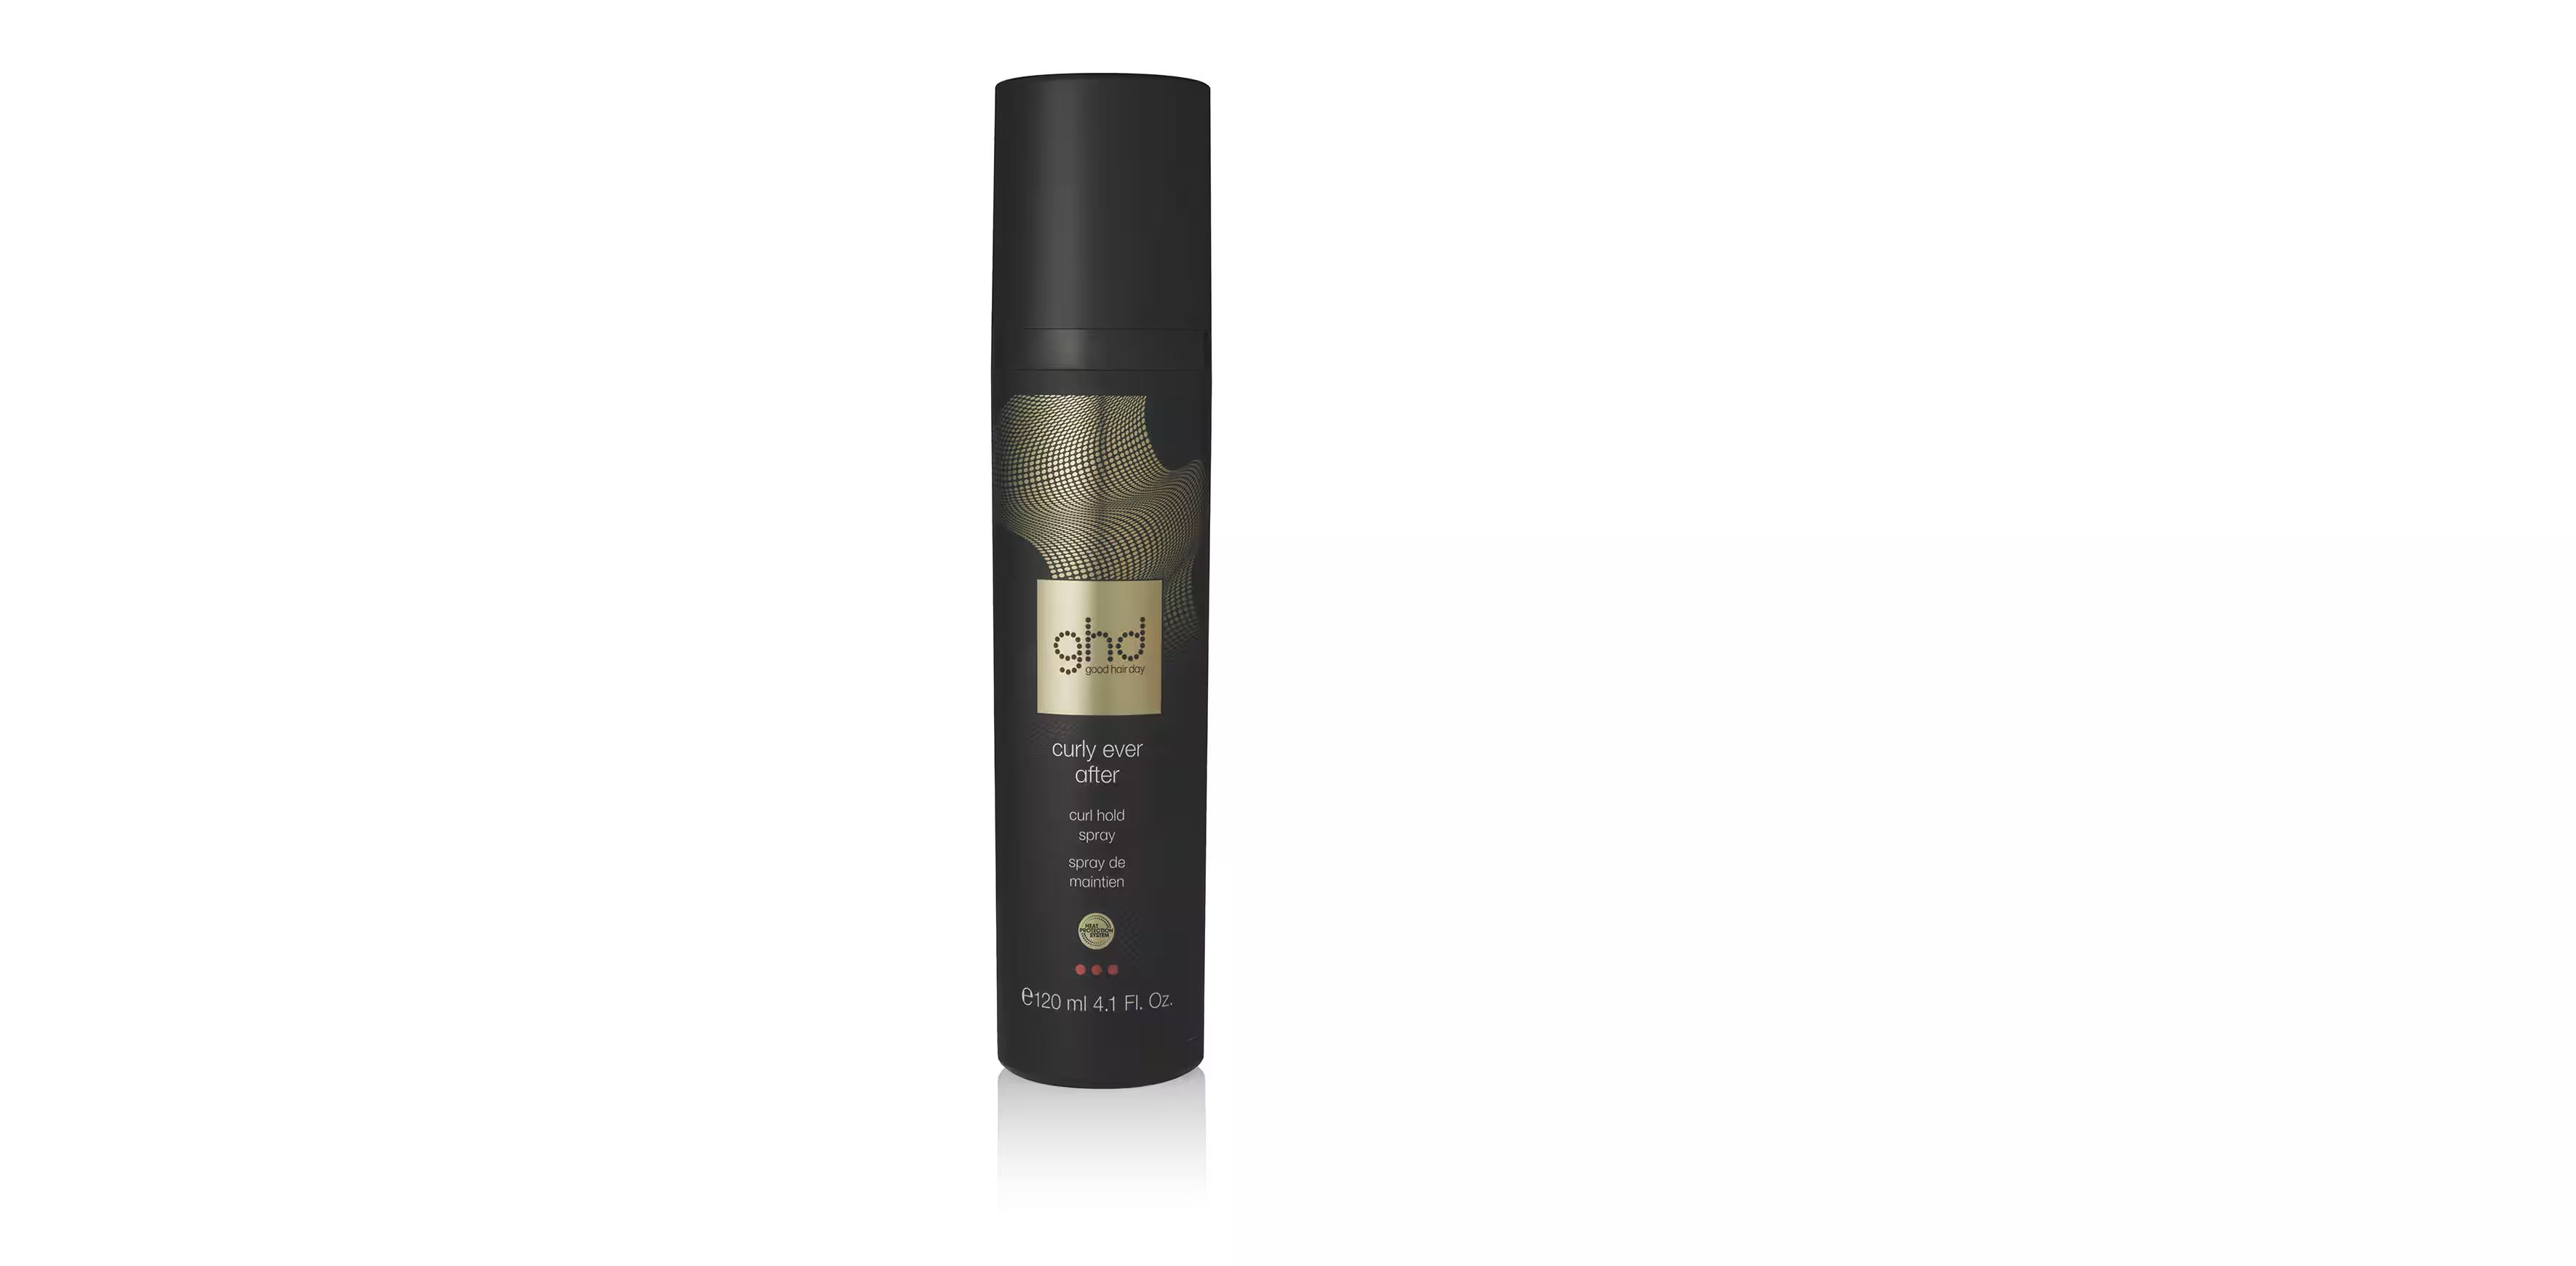 GHD CURLY EVER AFTER - CURL HOLD SPRAY | ghd (UK)